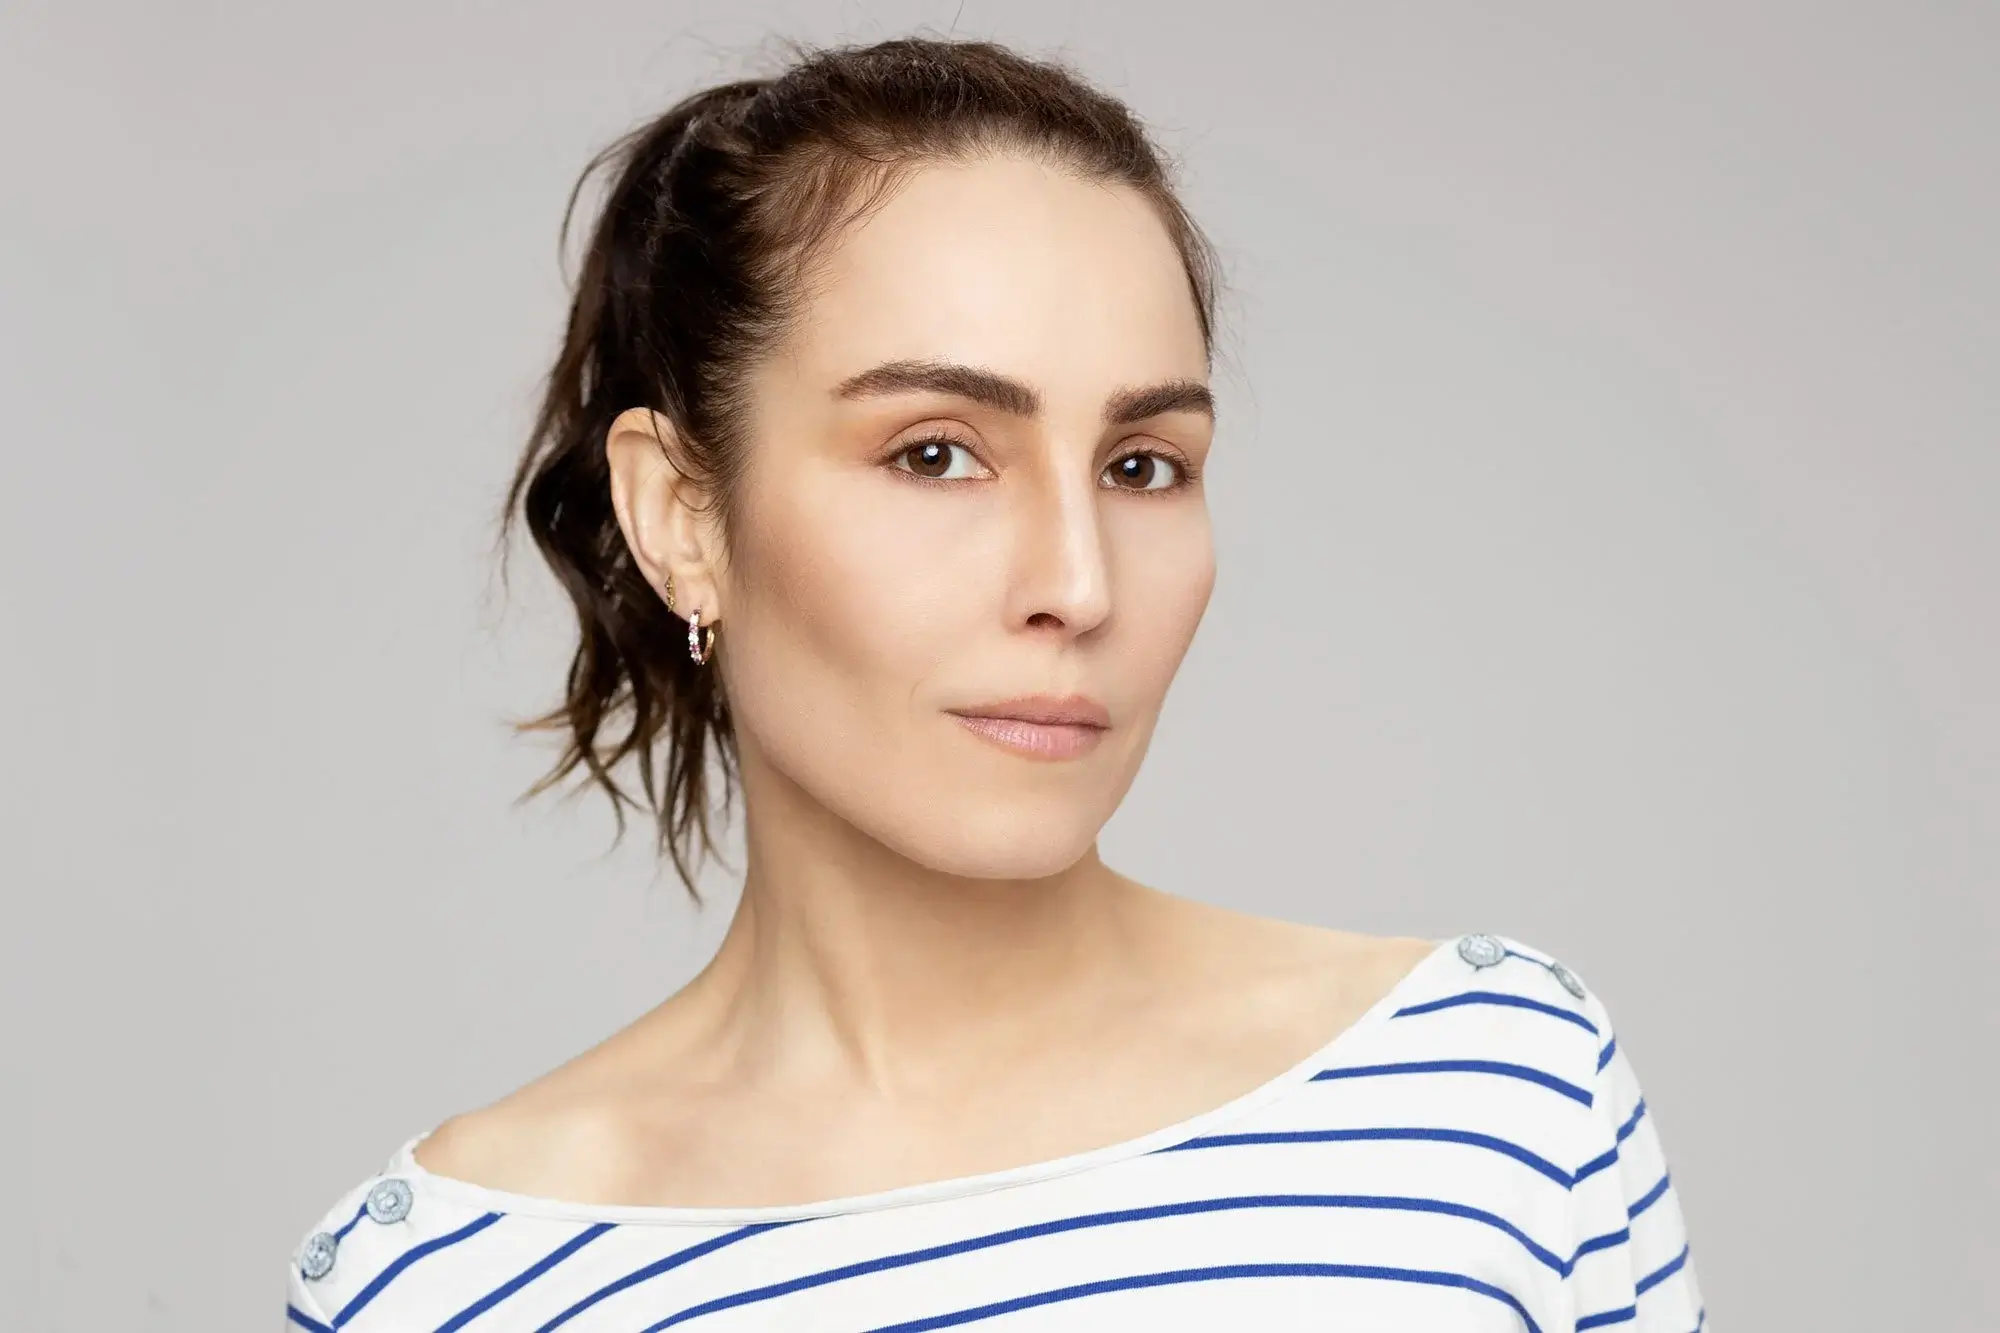 Noomi Rapace Net Worth